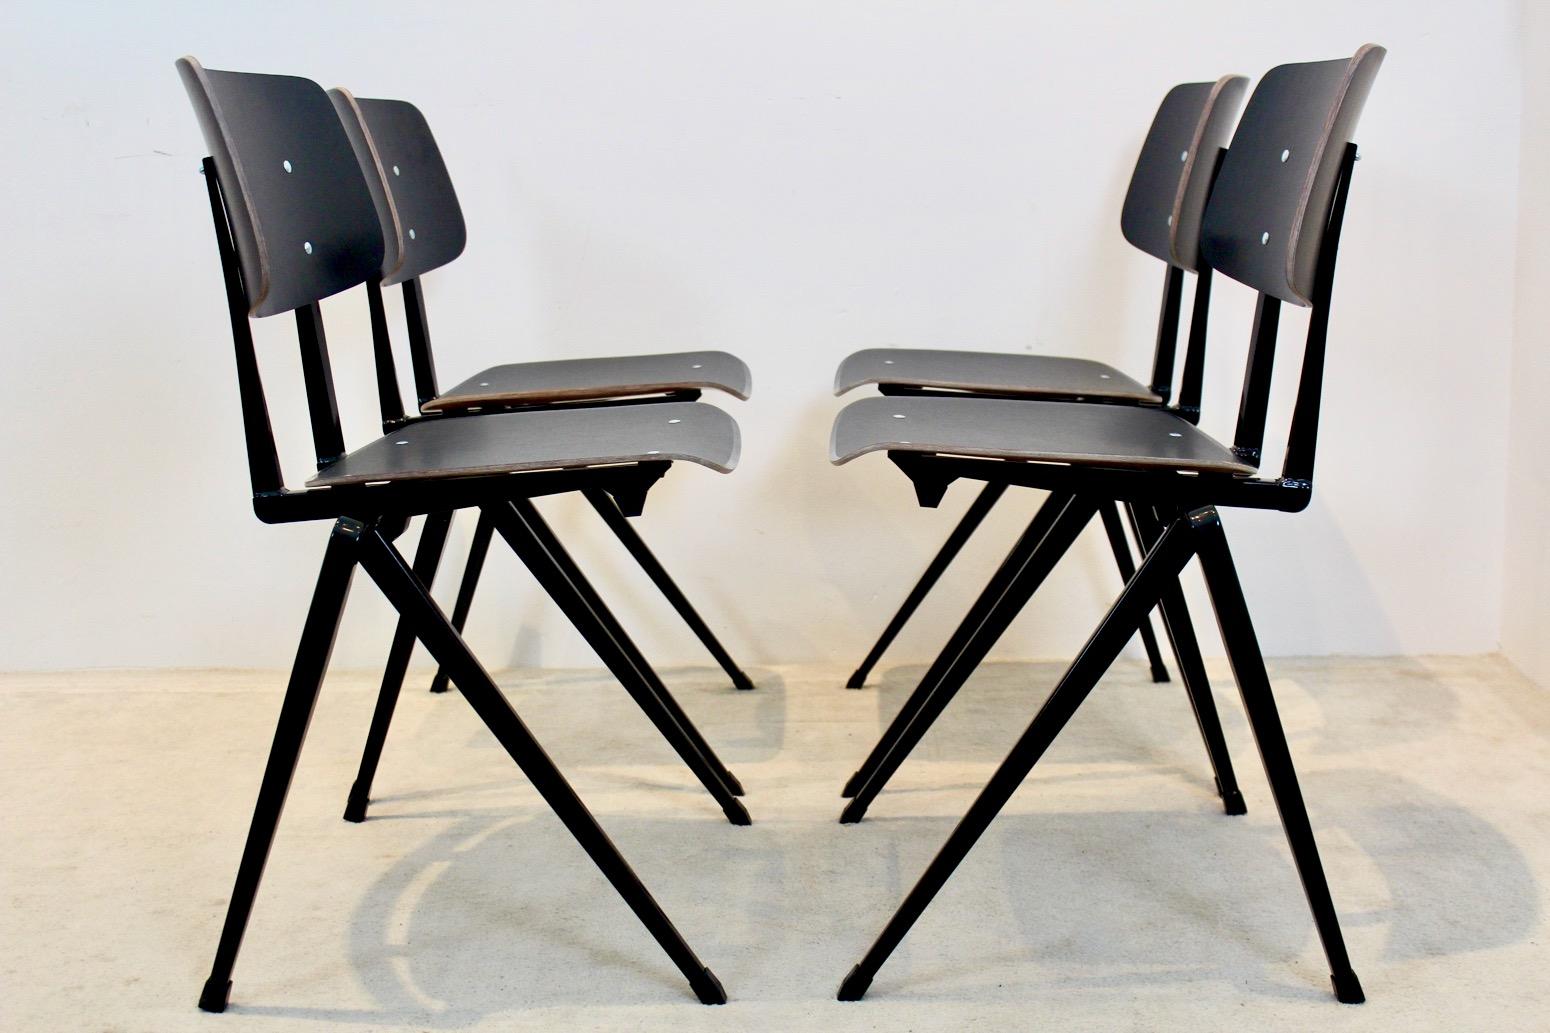 Highly wanted and in multiple colors and quantities, with bespoke service available: the Industrial S17 stacking chairs by Galvanitas. These Sculptural chairs are made for optimal comfort and heavy duty; the Carbonwood seating parts are made of a